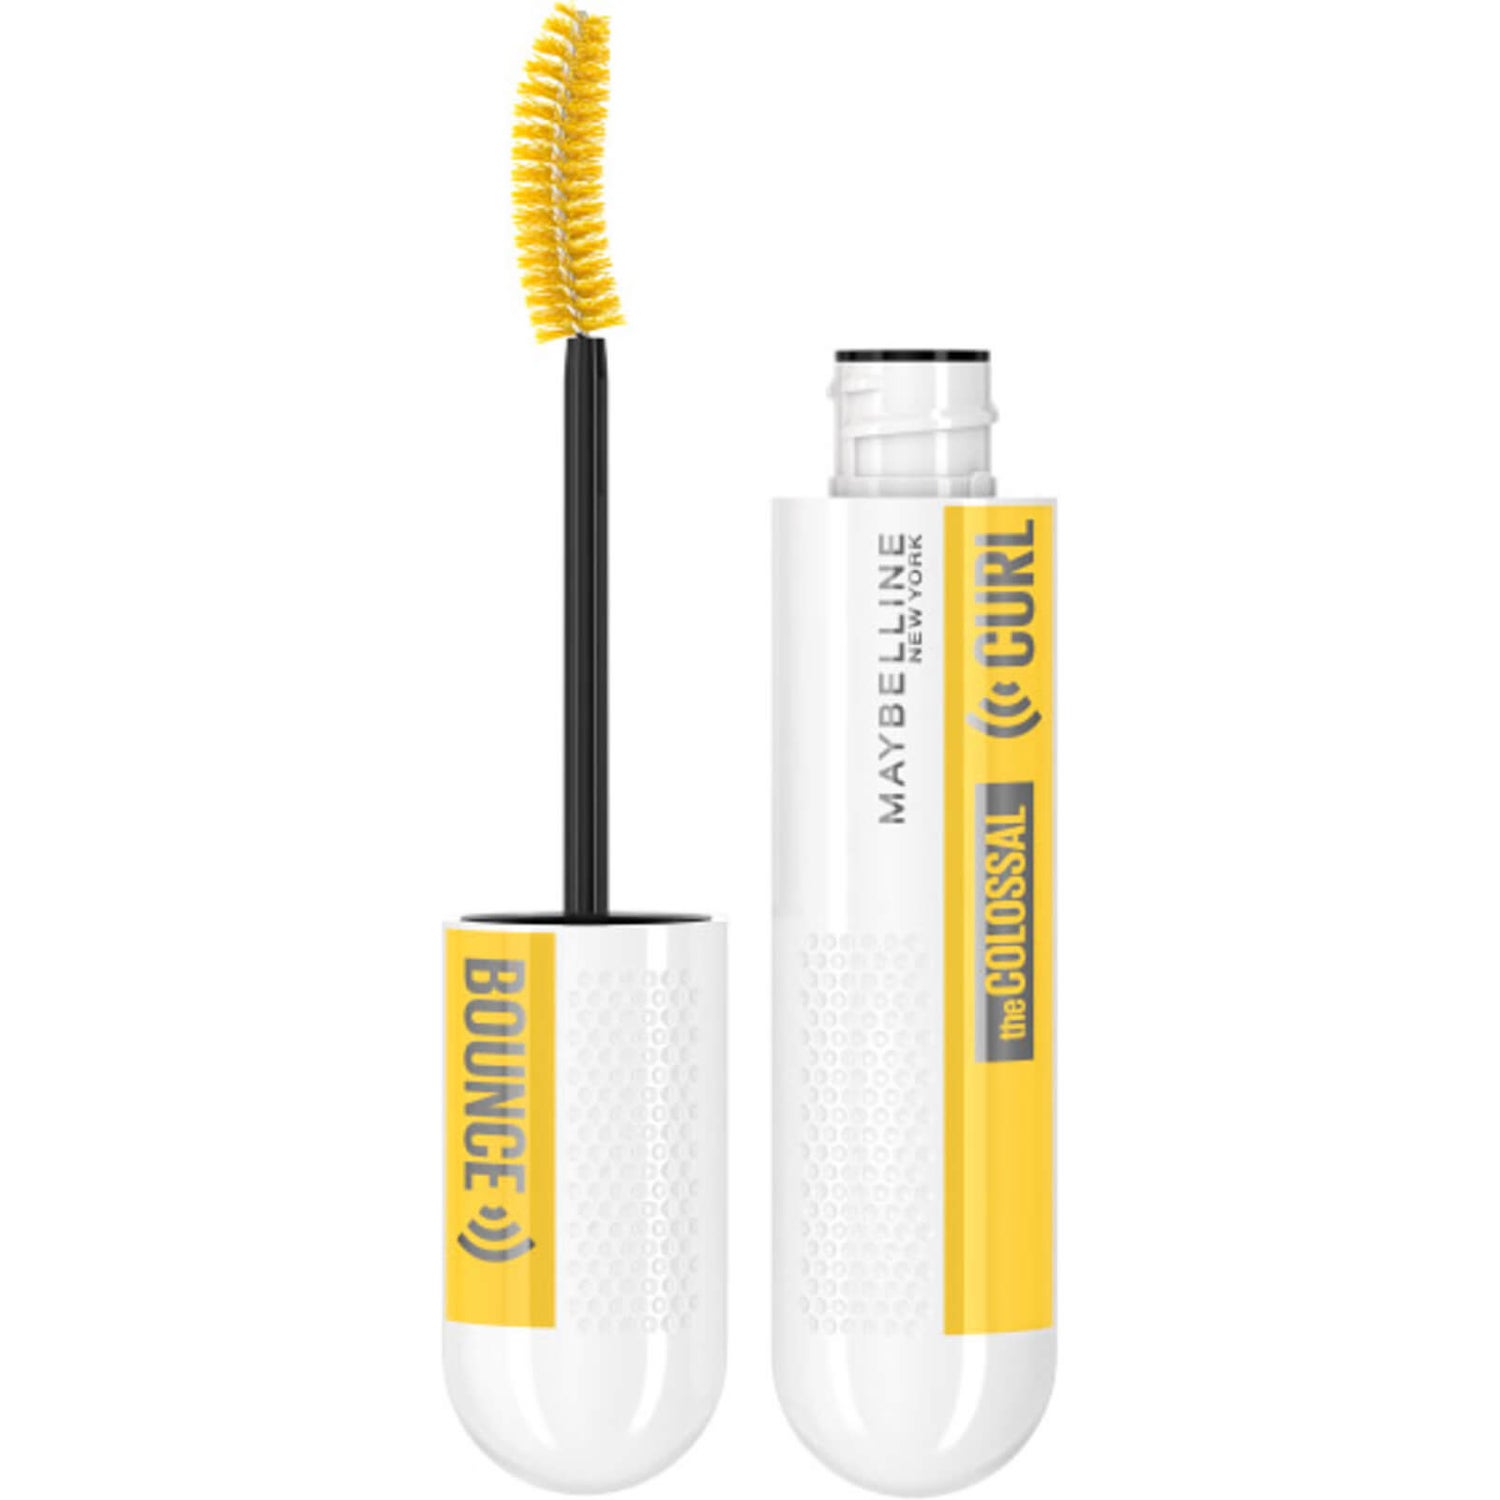 Mascara Colossal Curl Bounce Maybelline - Très noir 61 g